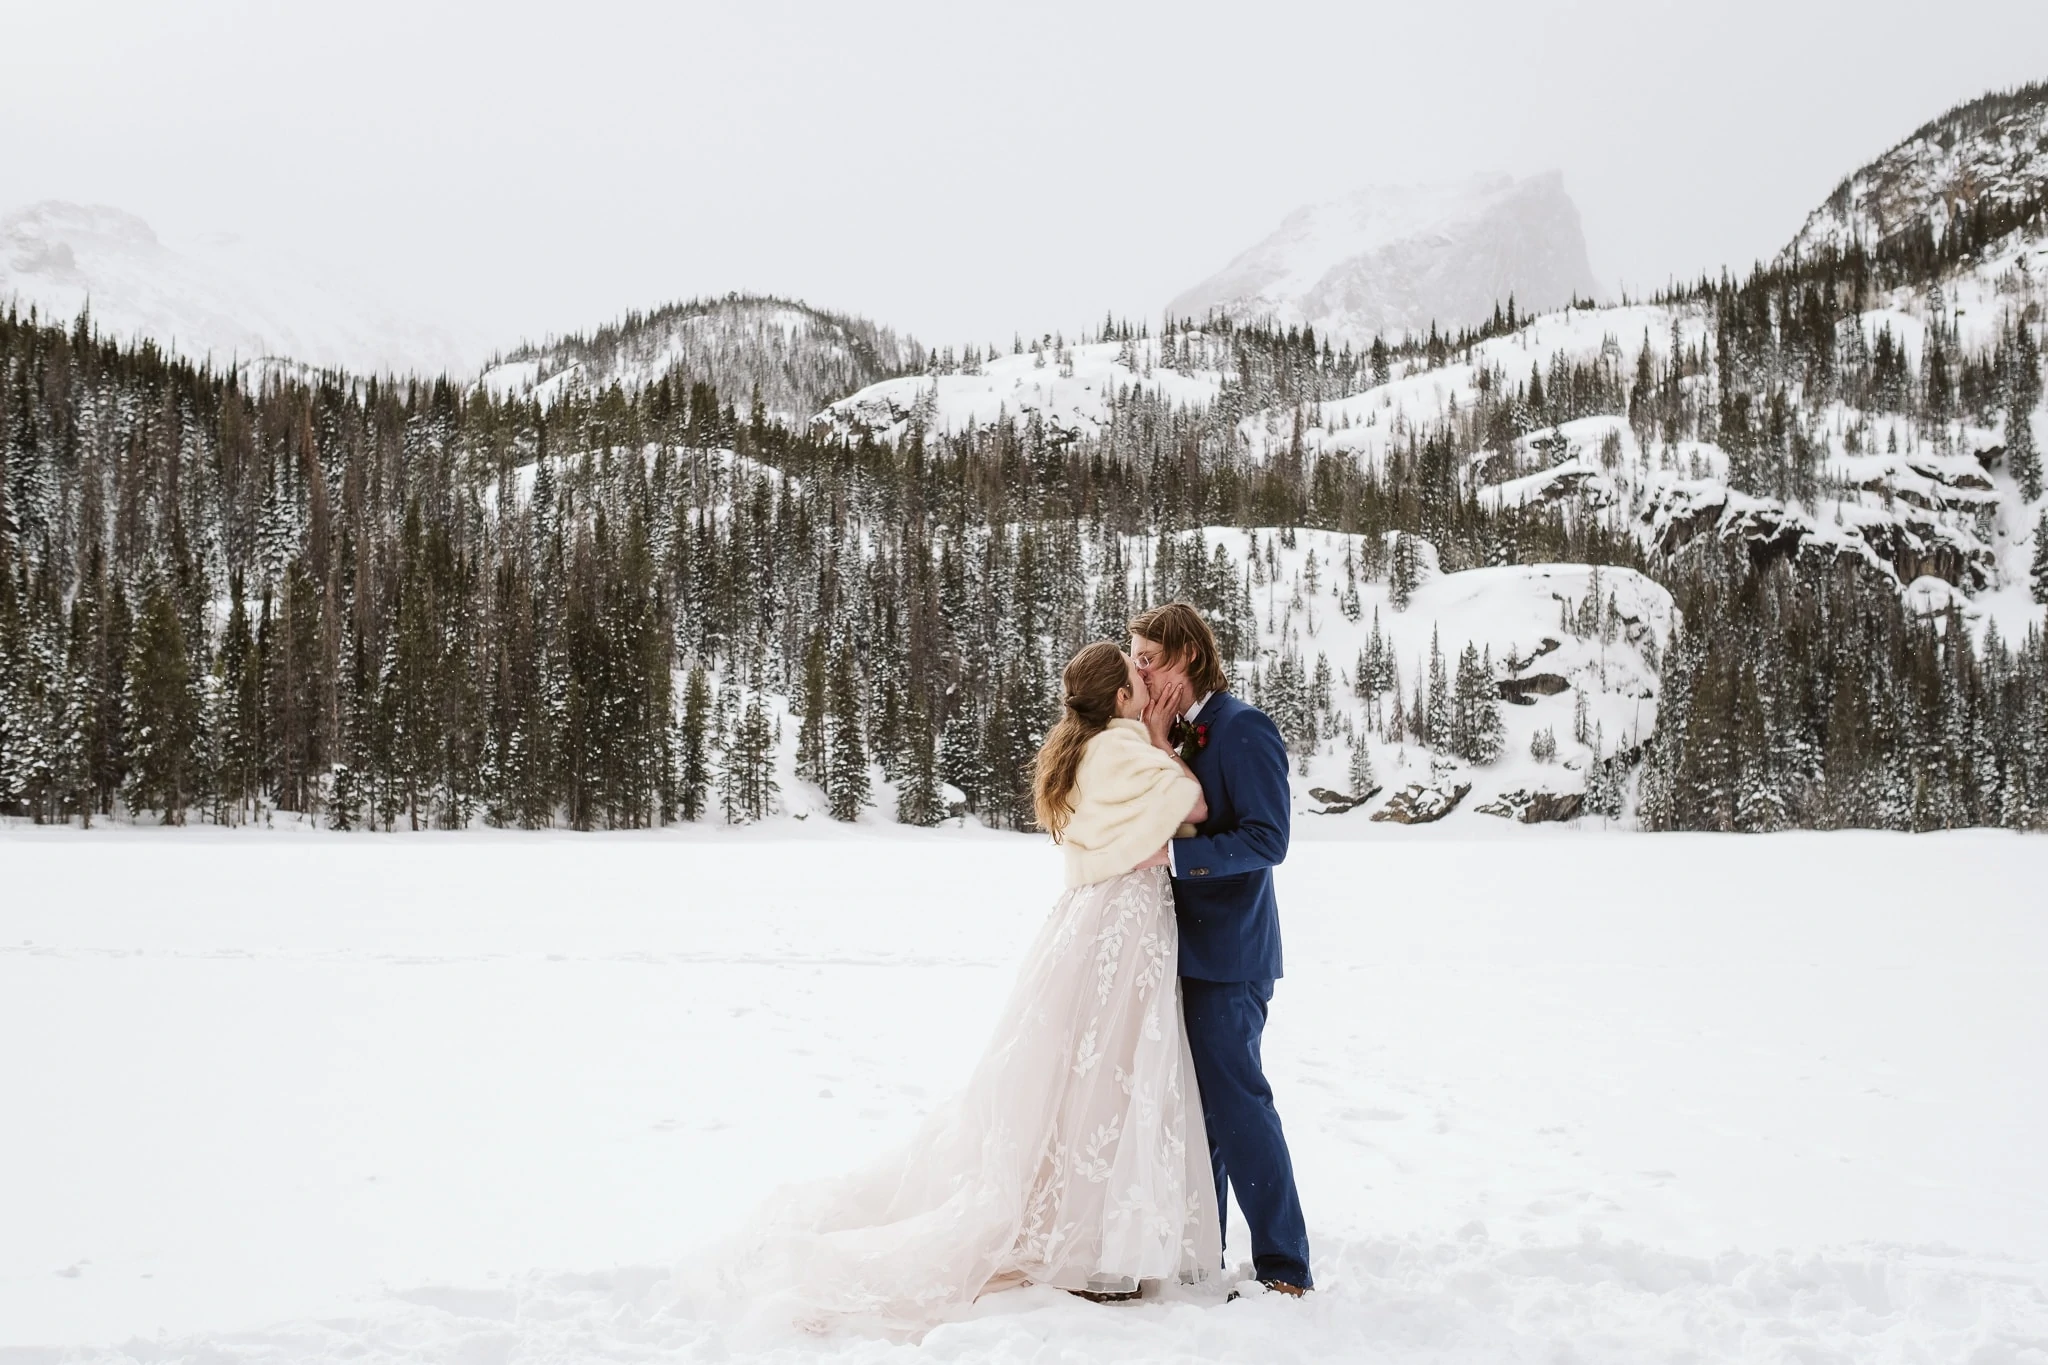 February elopement in Colorado